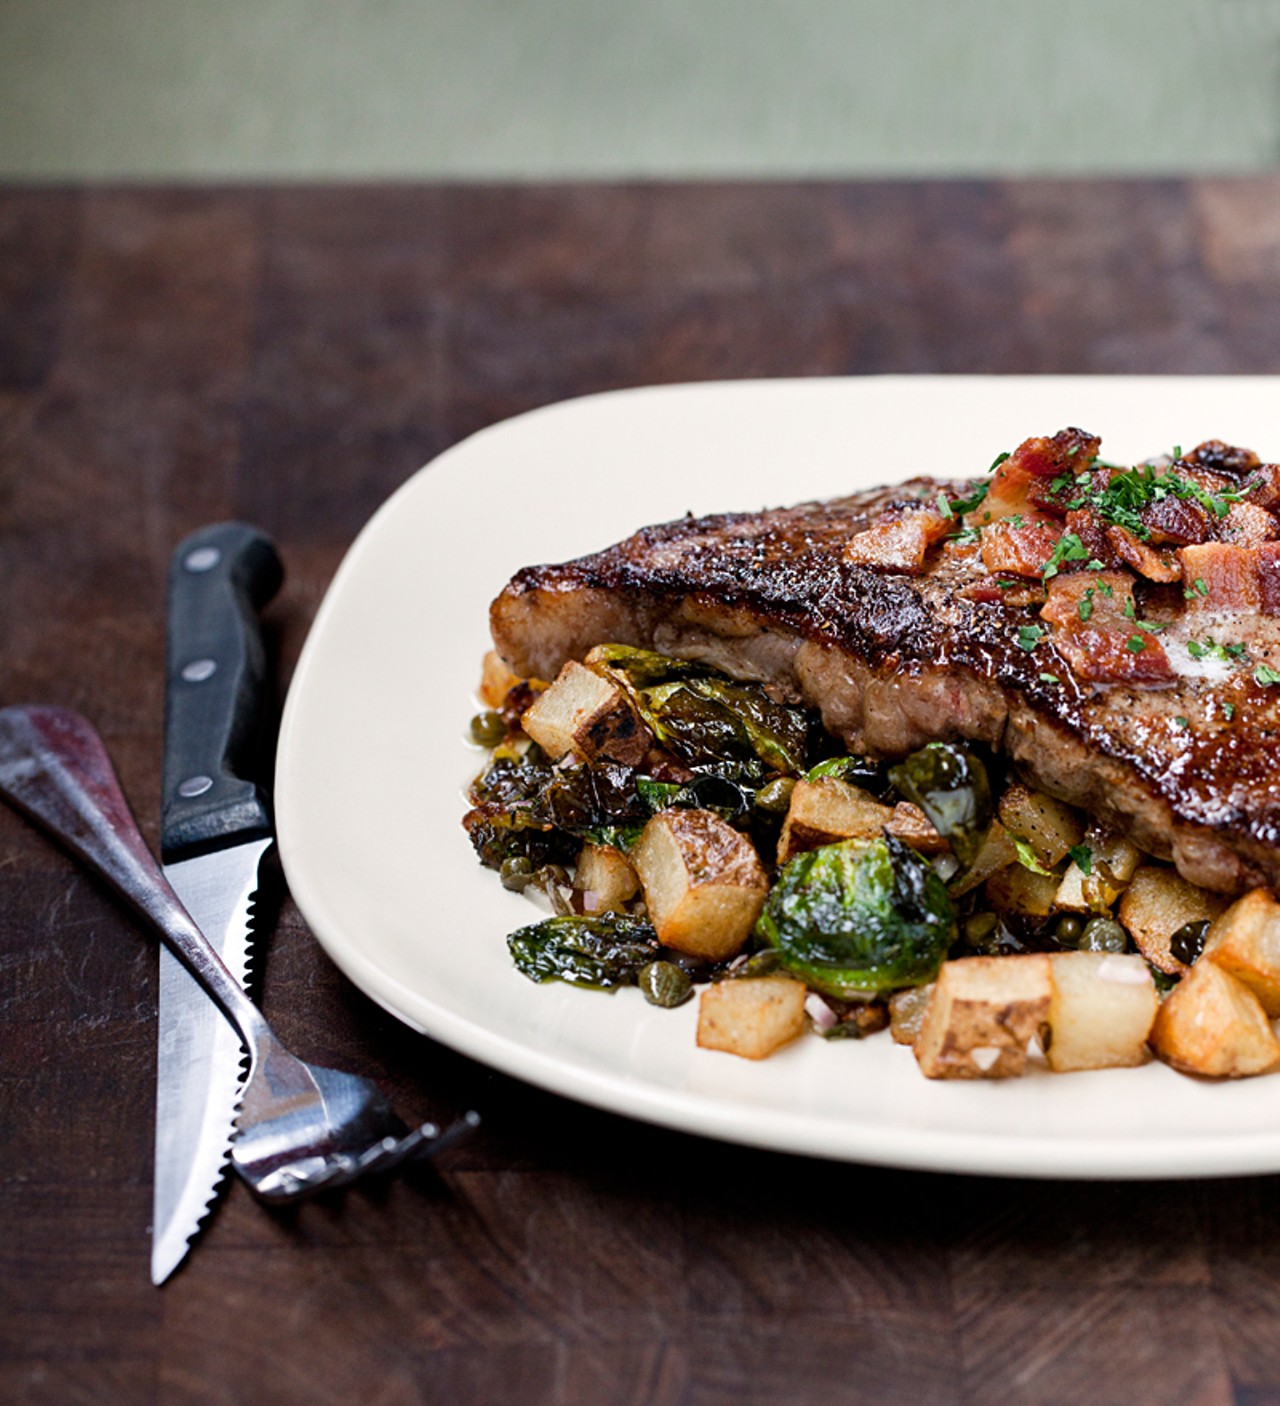 The steak of the day on February 8, 2012, was a ribeye. The steak of the day is served with crispy potatoes, Brussel sprouts and bacon butter.